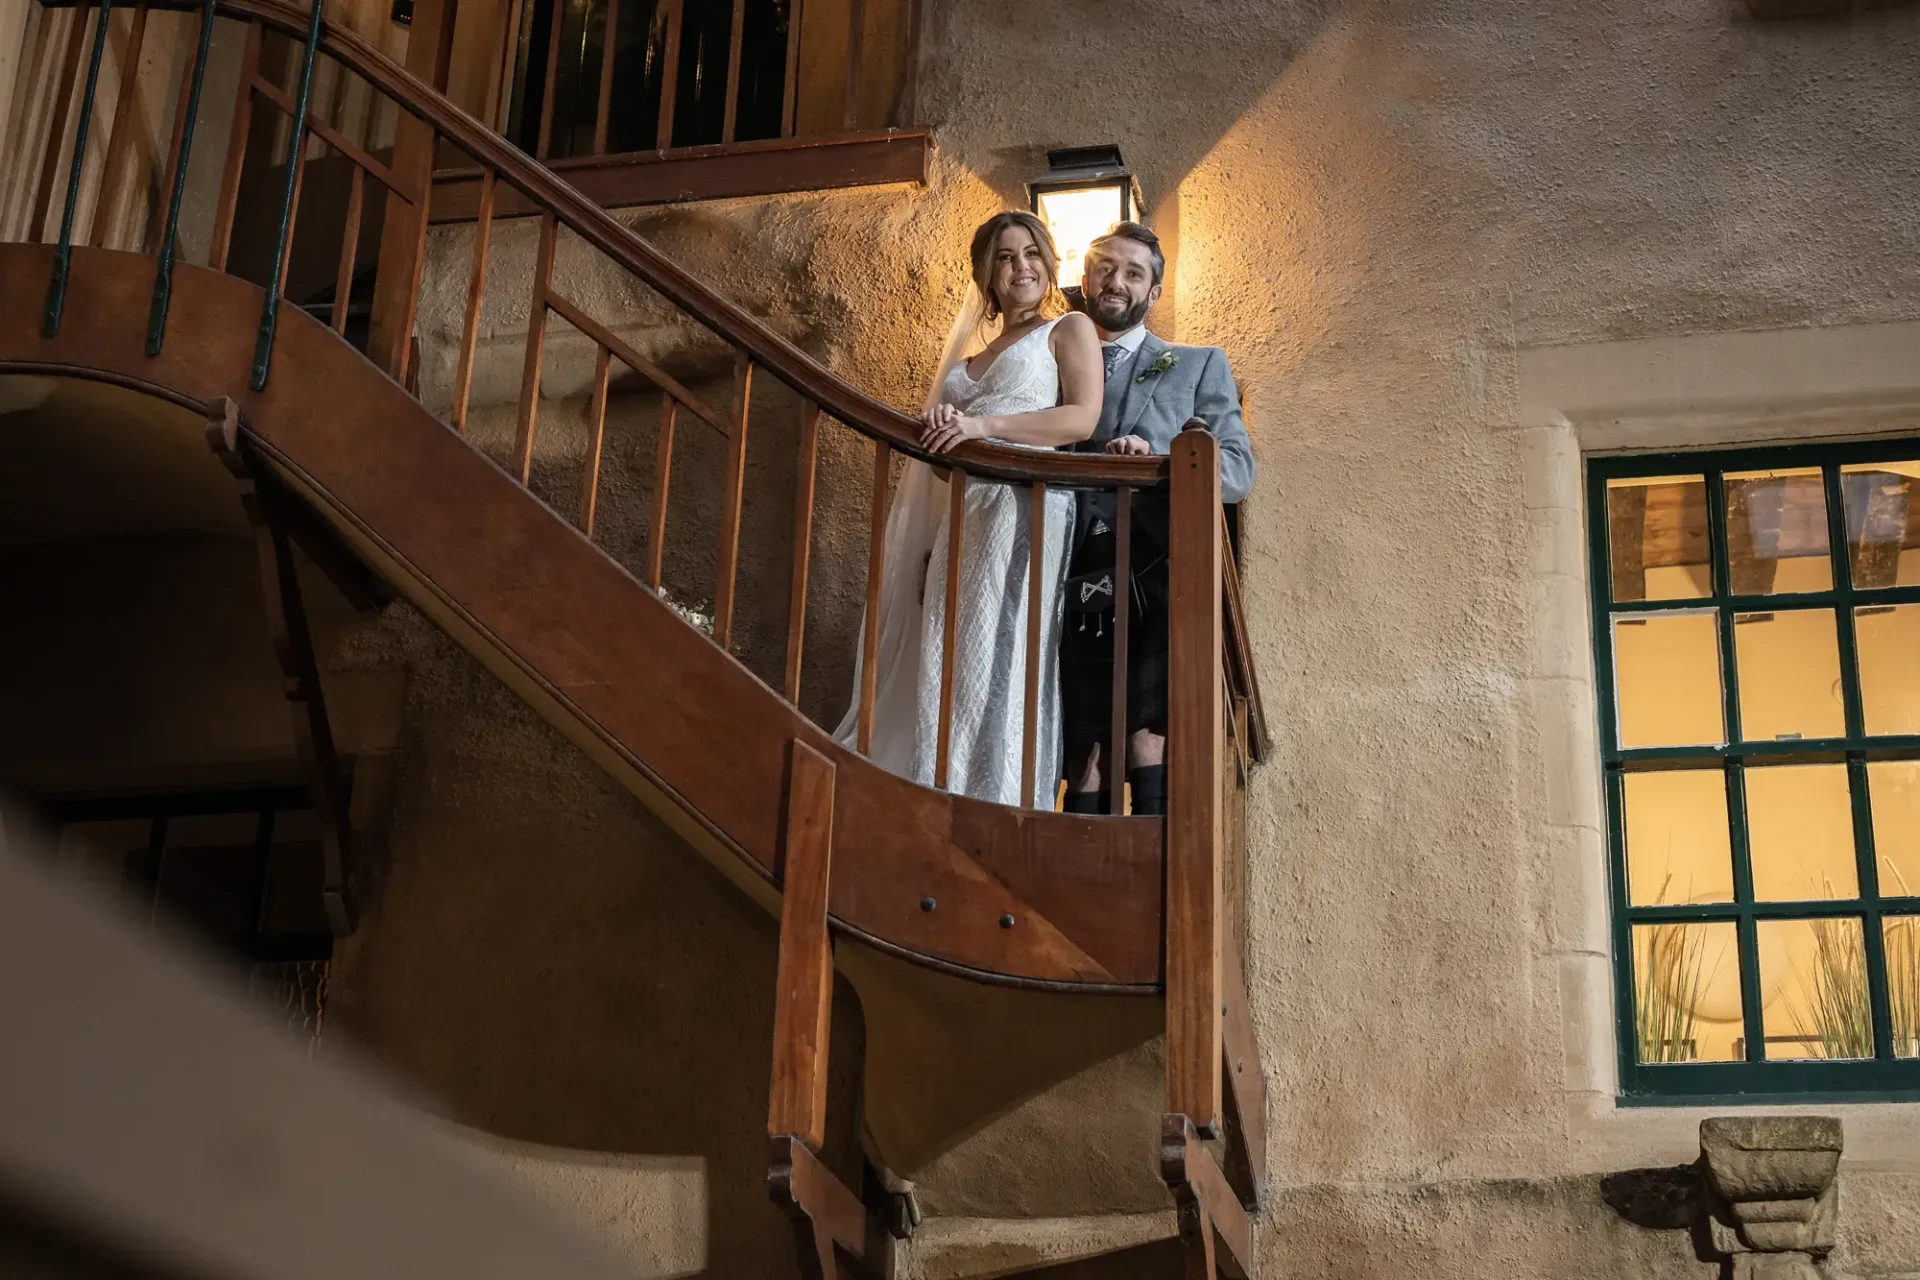 A bride and groom smiling, standing together on a curved wooden staircase in an elegant, warmly lit room.